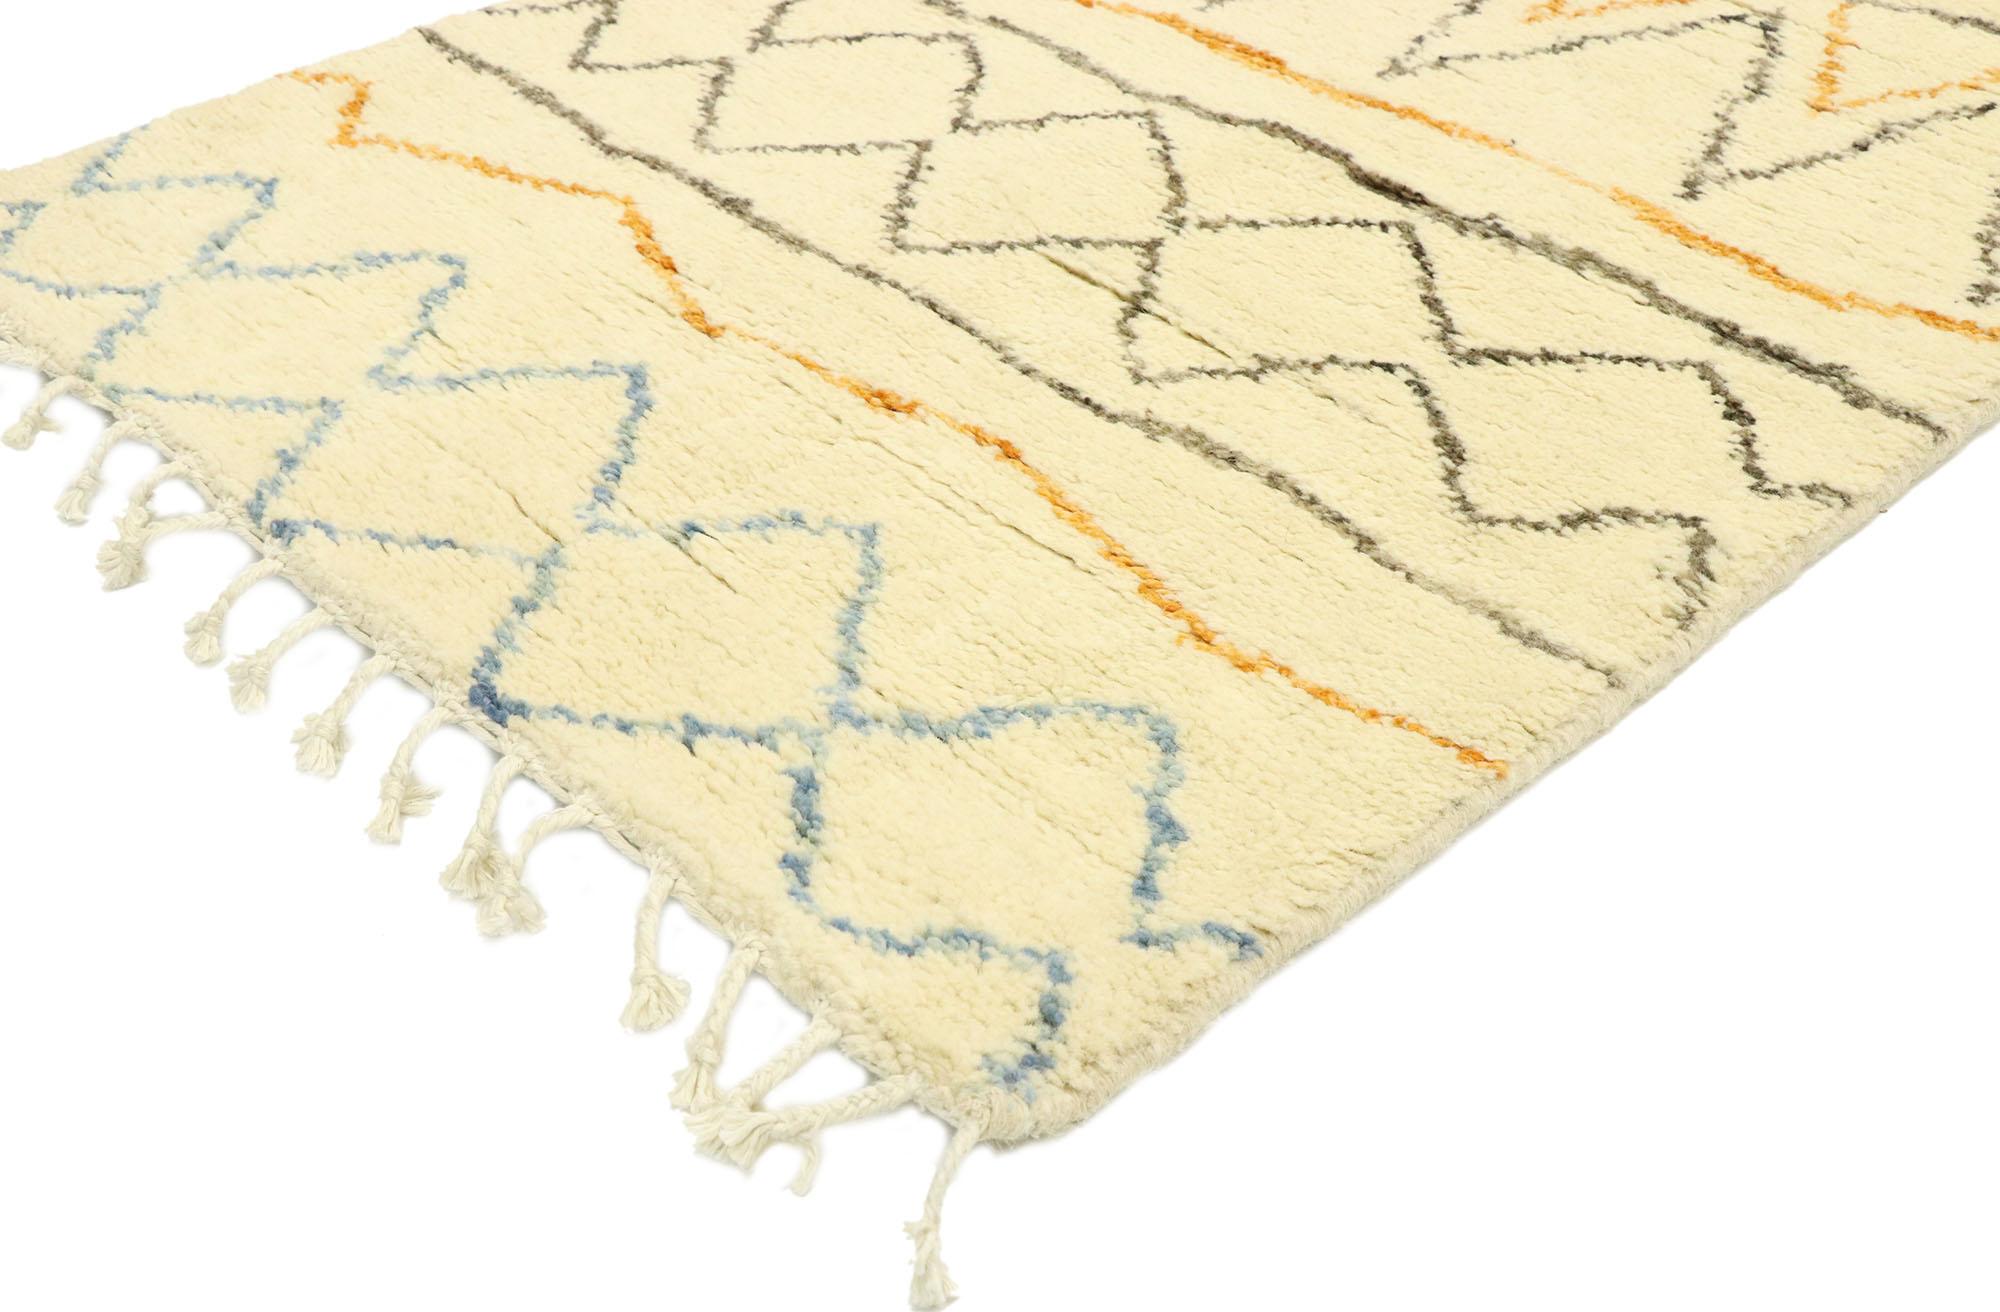 80607, new contemporary Moroccan runner with cozy boho chic tribal style. Softer yet no less striking, this hand knotted wool contemporary Moroccan runner embodies cozy boho chic tribal style with hygge vibes. The Moroccan style hallway runner